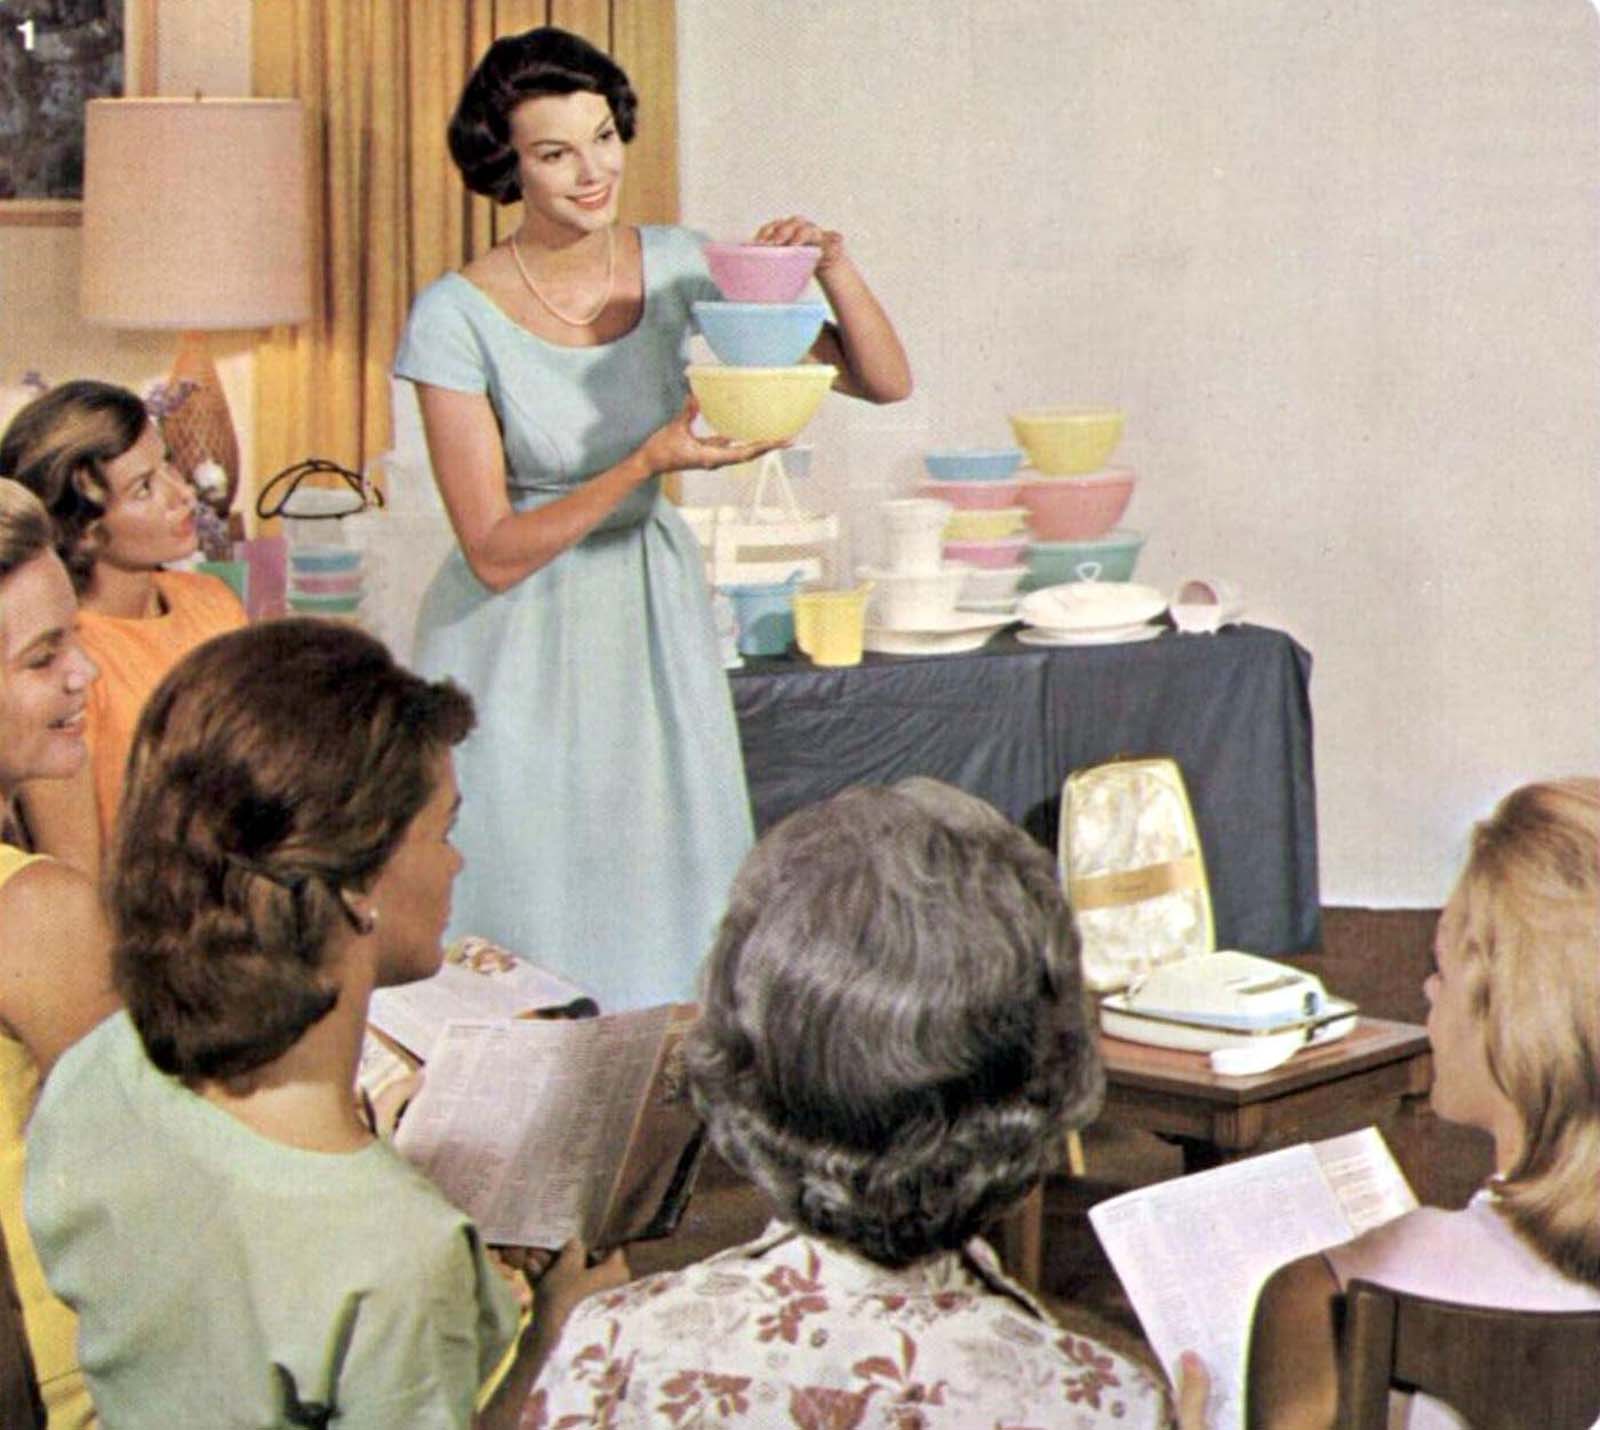 Tupperware parties became widespread in the 1950s.